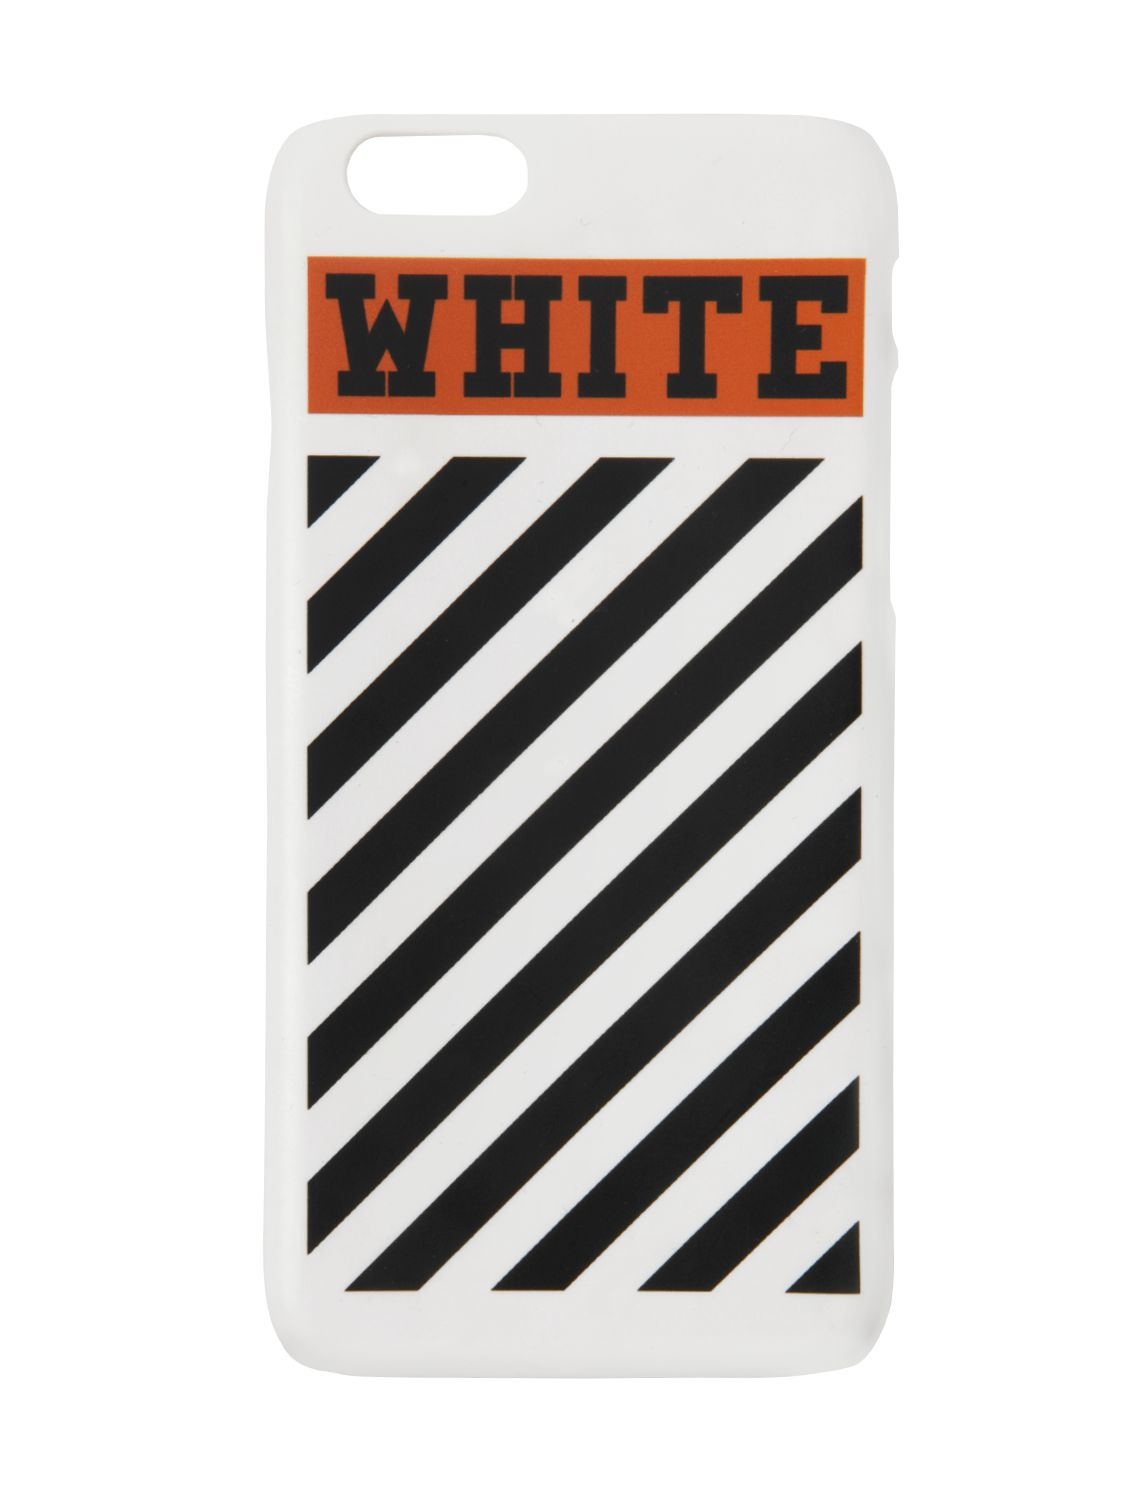 Lyst - Off-White C/O Virgil Abloh Striped iPhone 6 Case in White